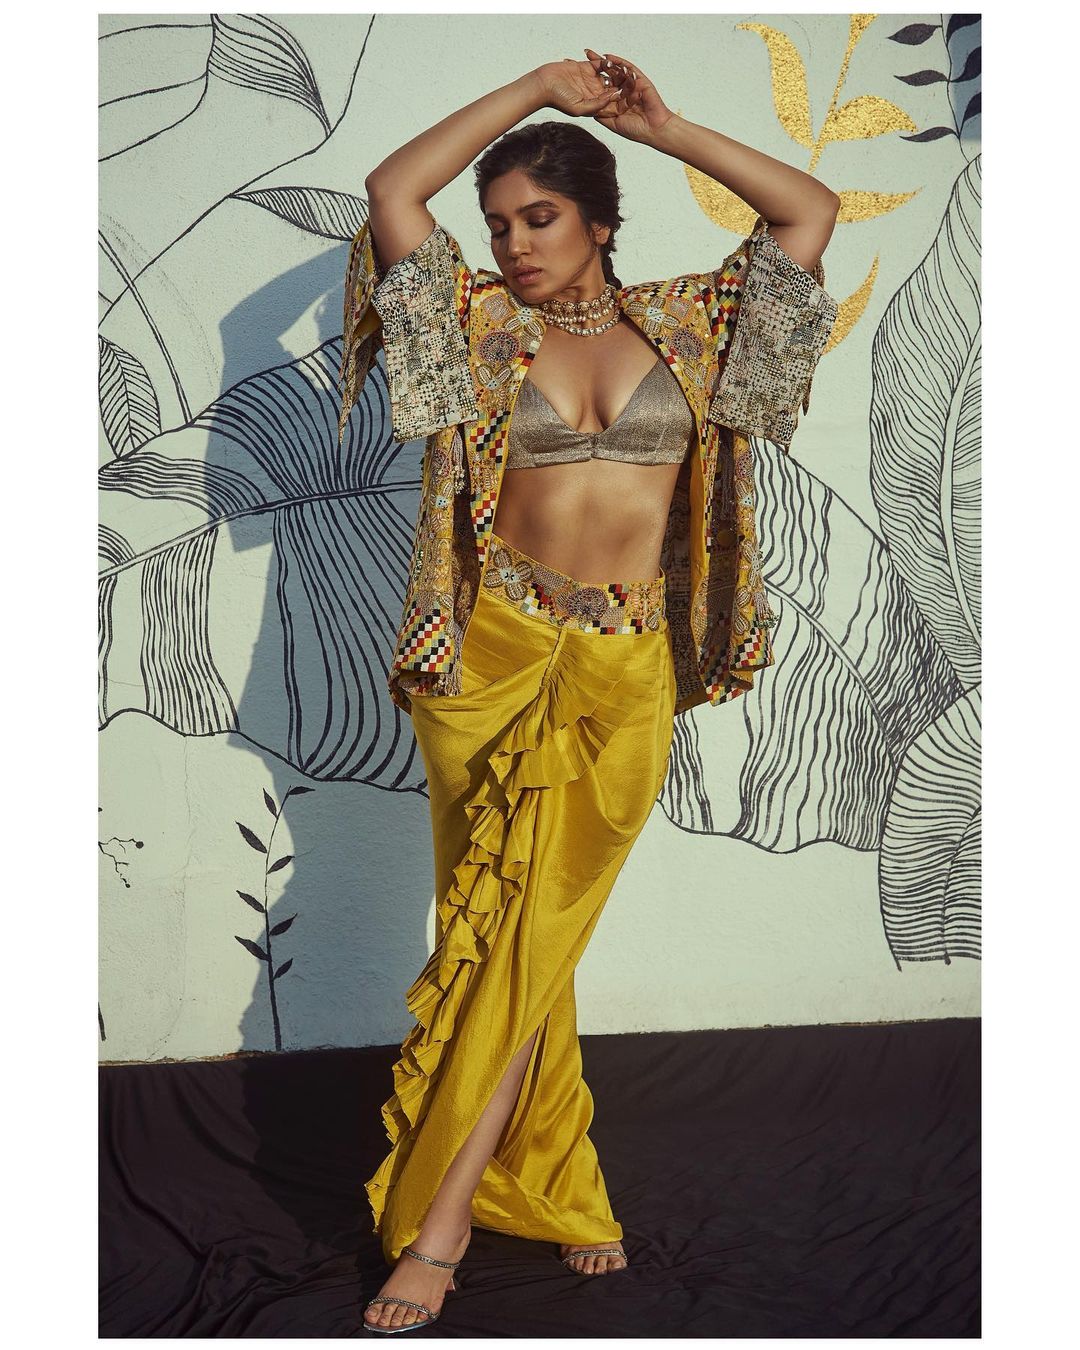 Bhumi Pednekar flaunts her curvaceous figure in the bralette and wrap skirt